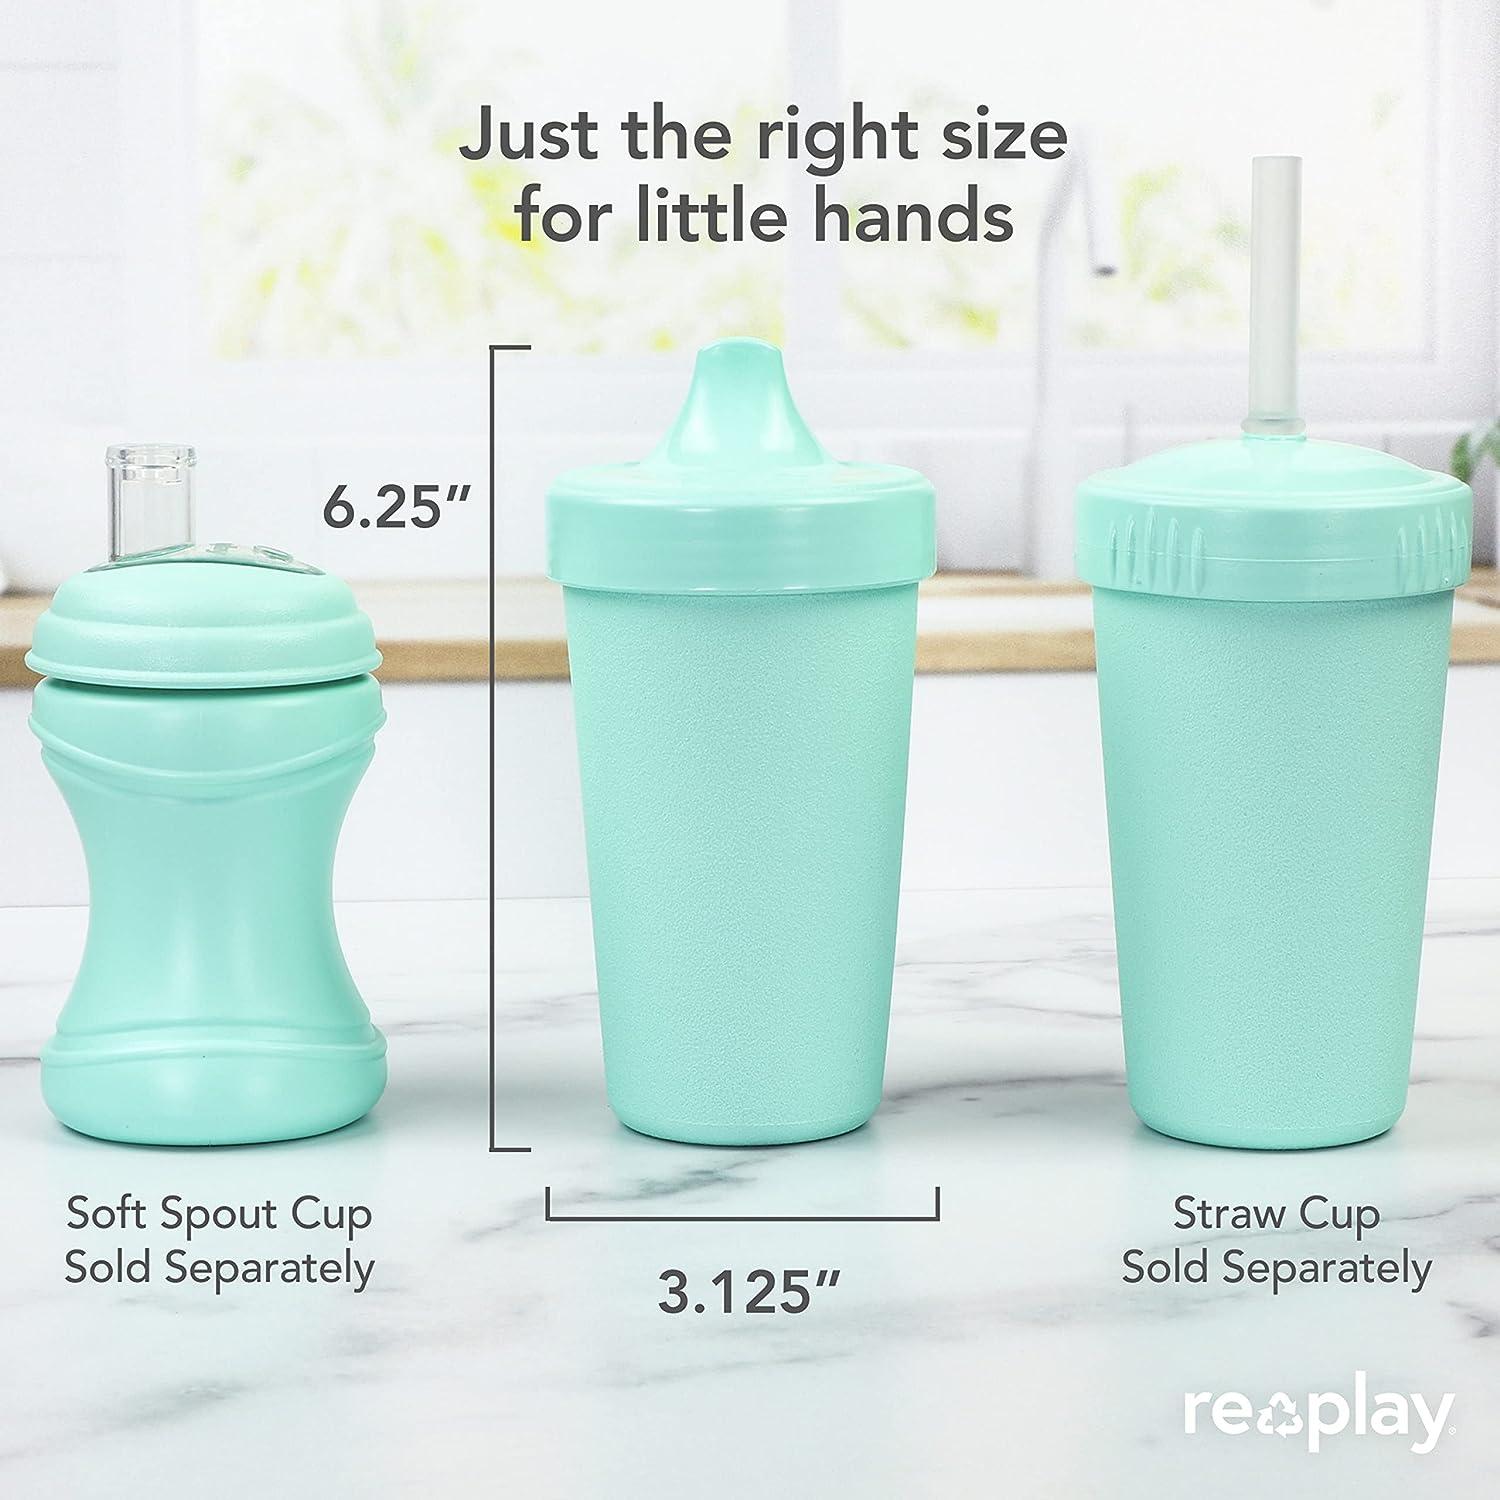 Re-Play Made in The USA 4pk No Spill Sippy Cups for Baby, Toddler, and Child  Feeding - Sky Blue, Aqua, Navy, Teal (True Blue+) 